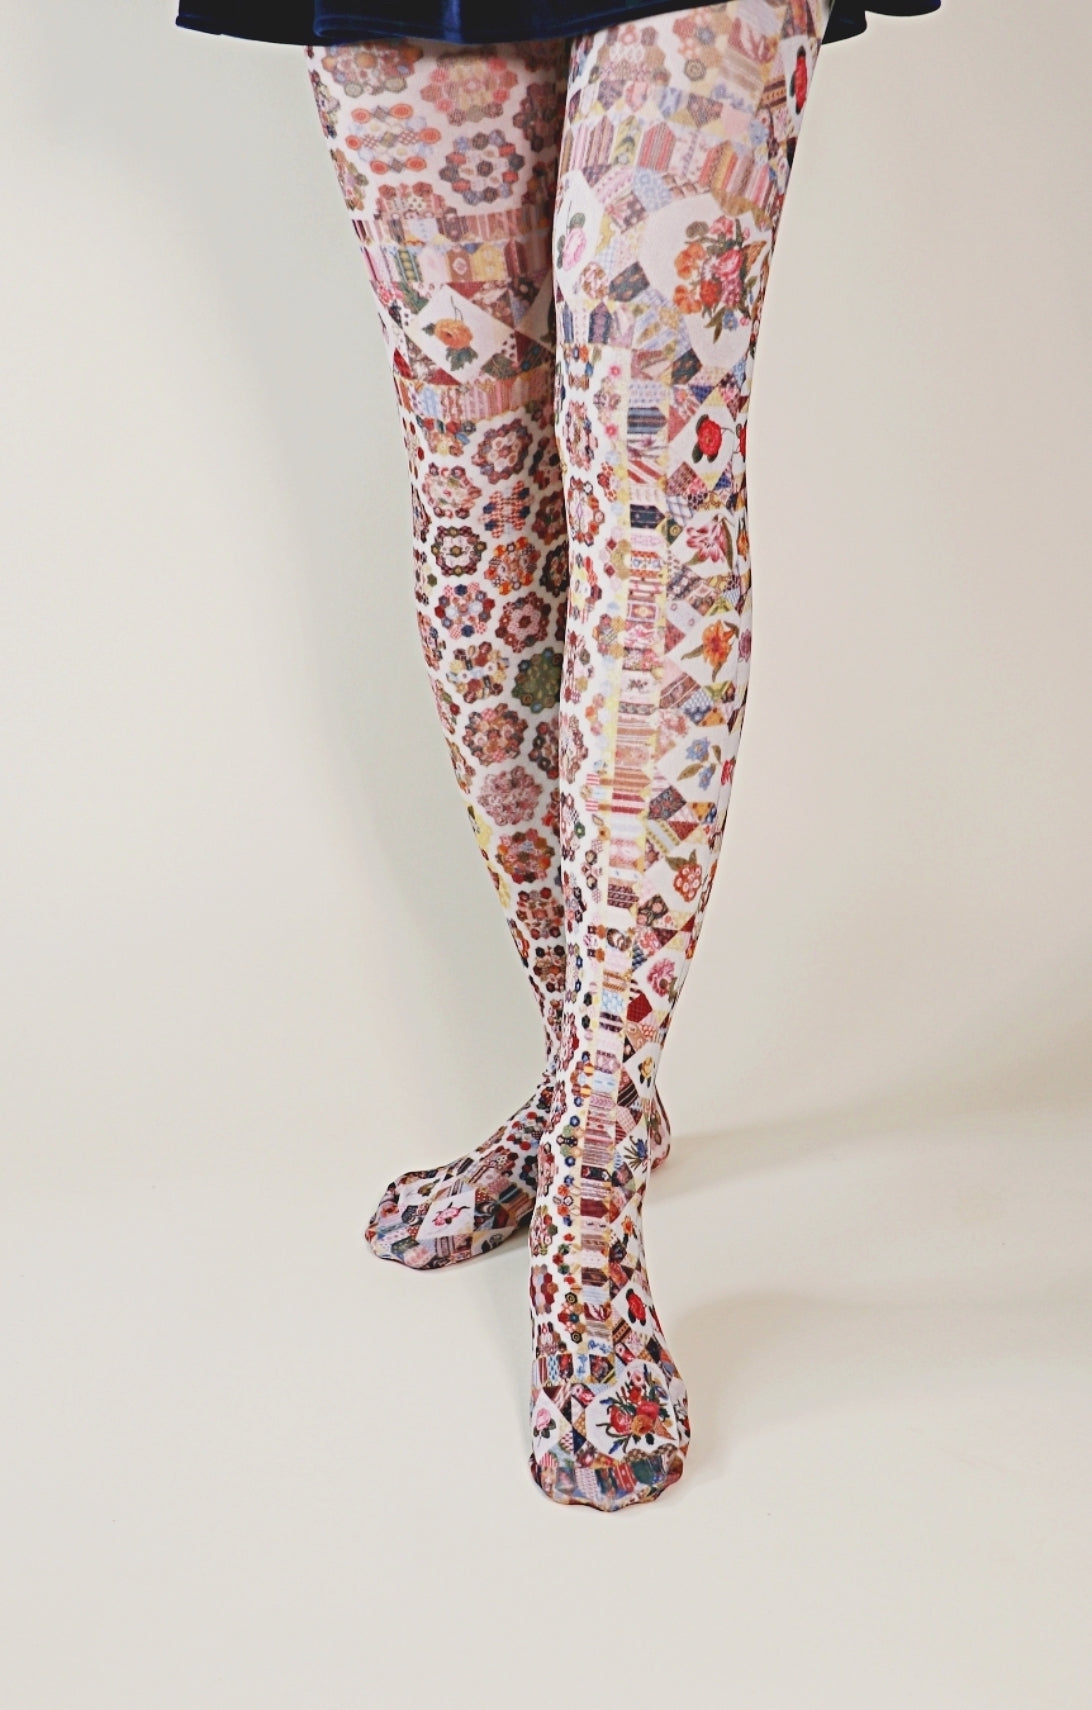 Overall reddish fabric with geometric patterns throughout the tights